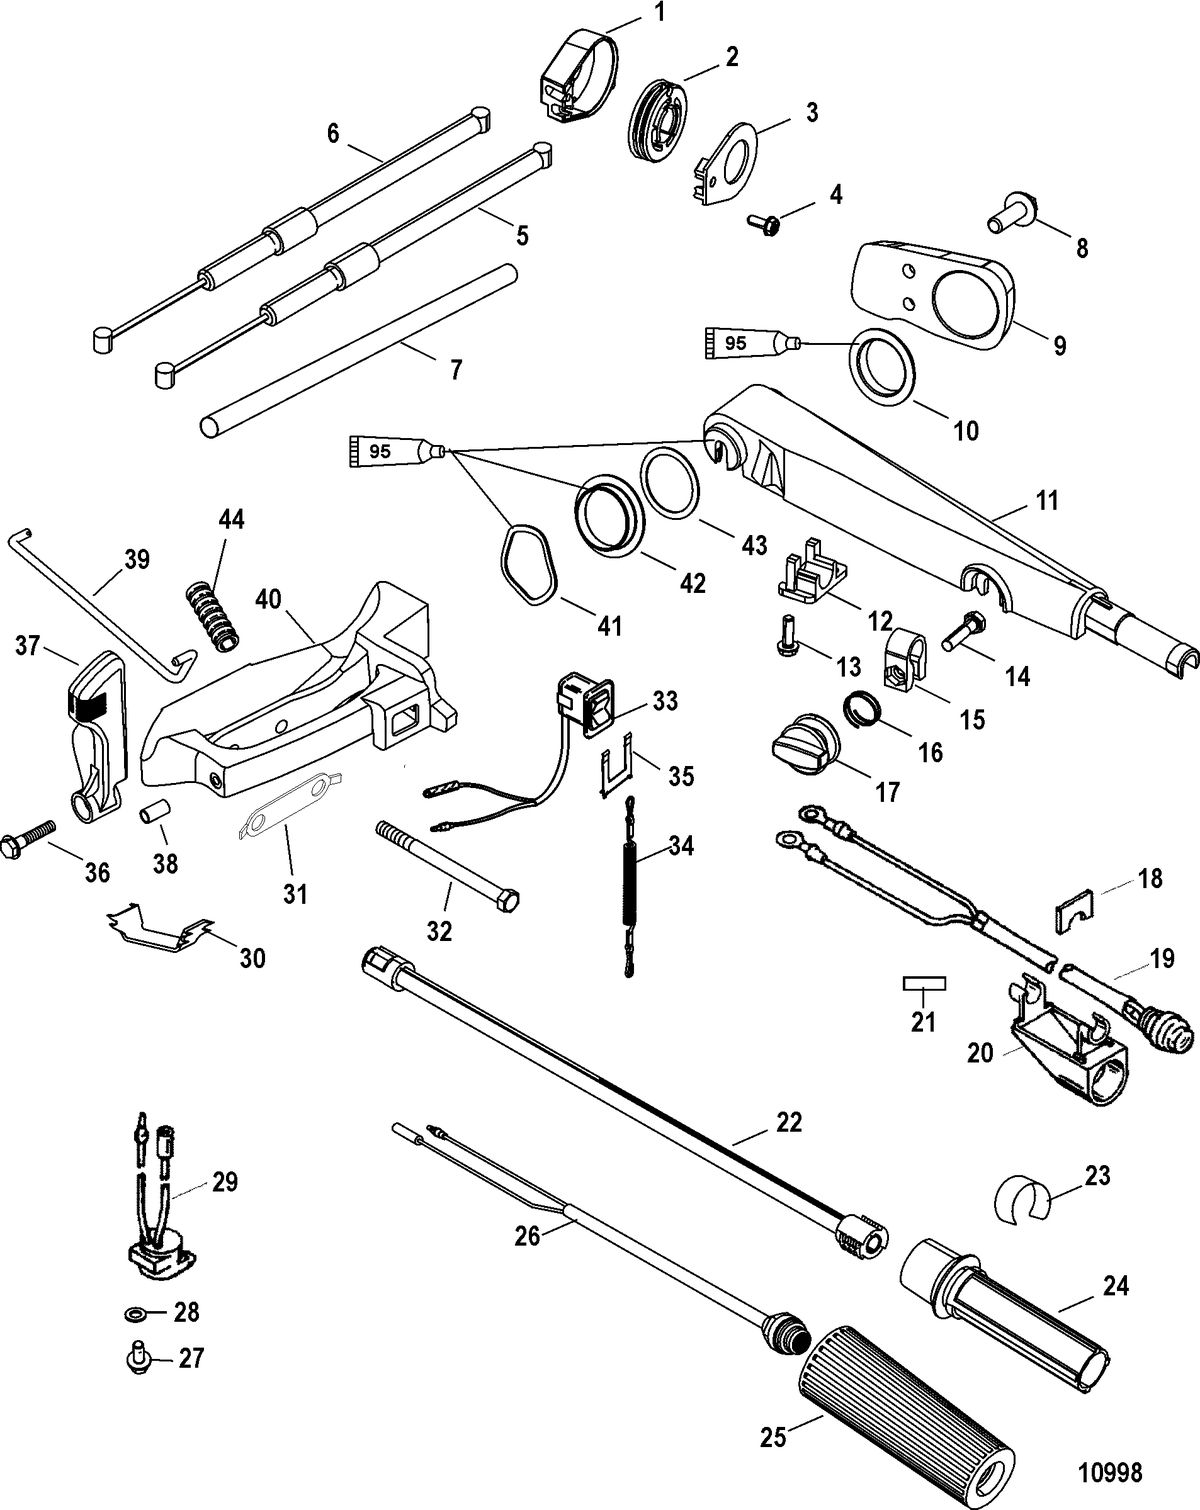 ACCESSORIES STEERING SYSTEMS AND COMPONENTS Tiller Handle Kit(828813A10 / A11 /A31)